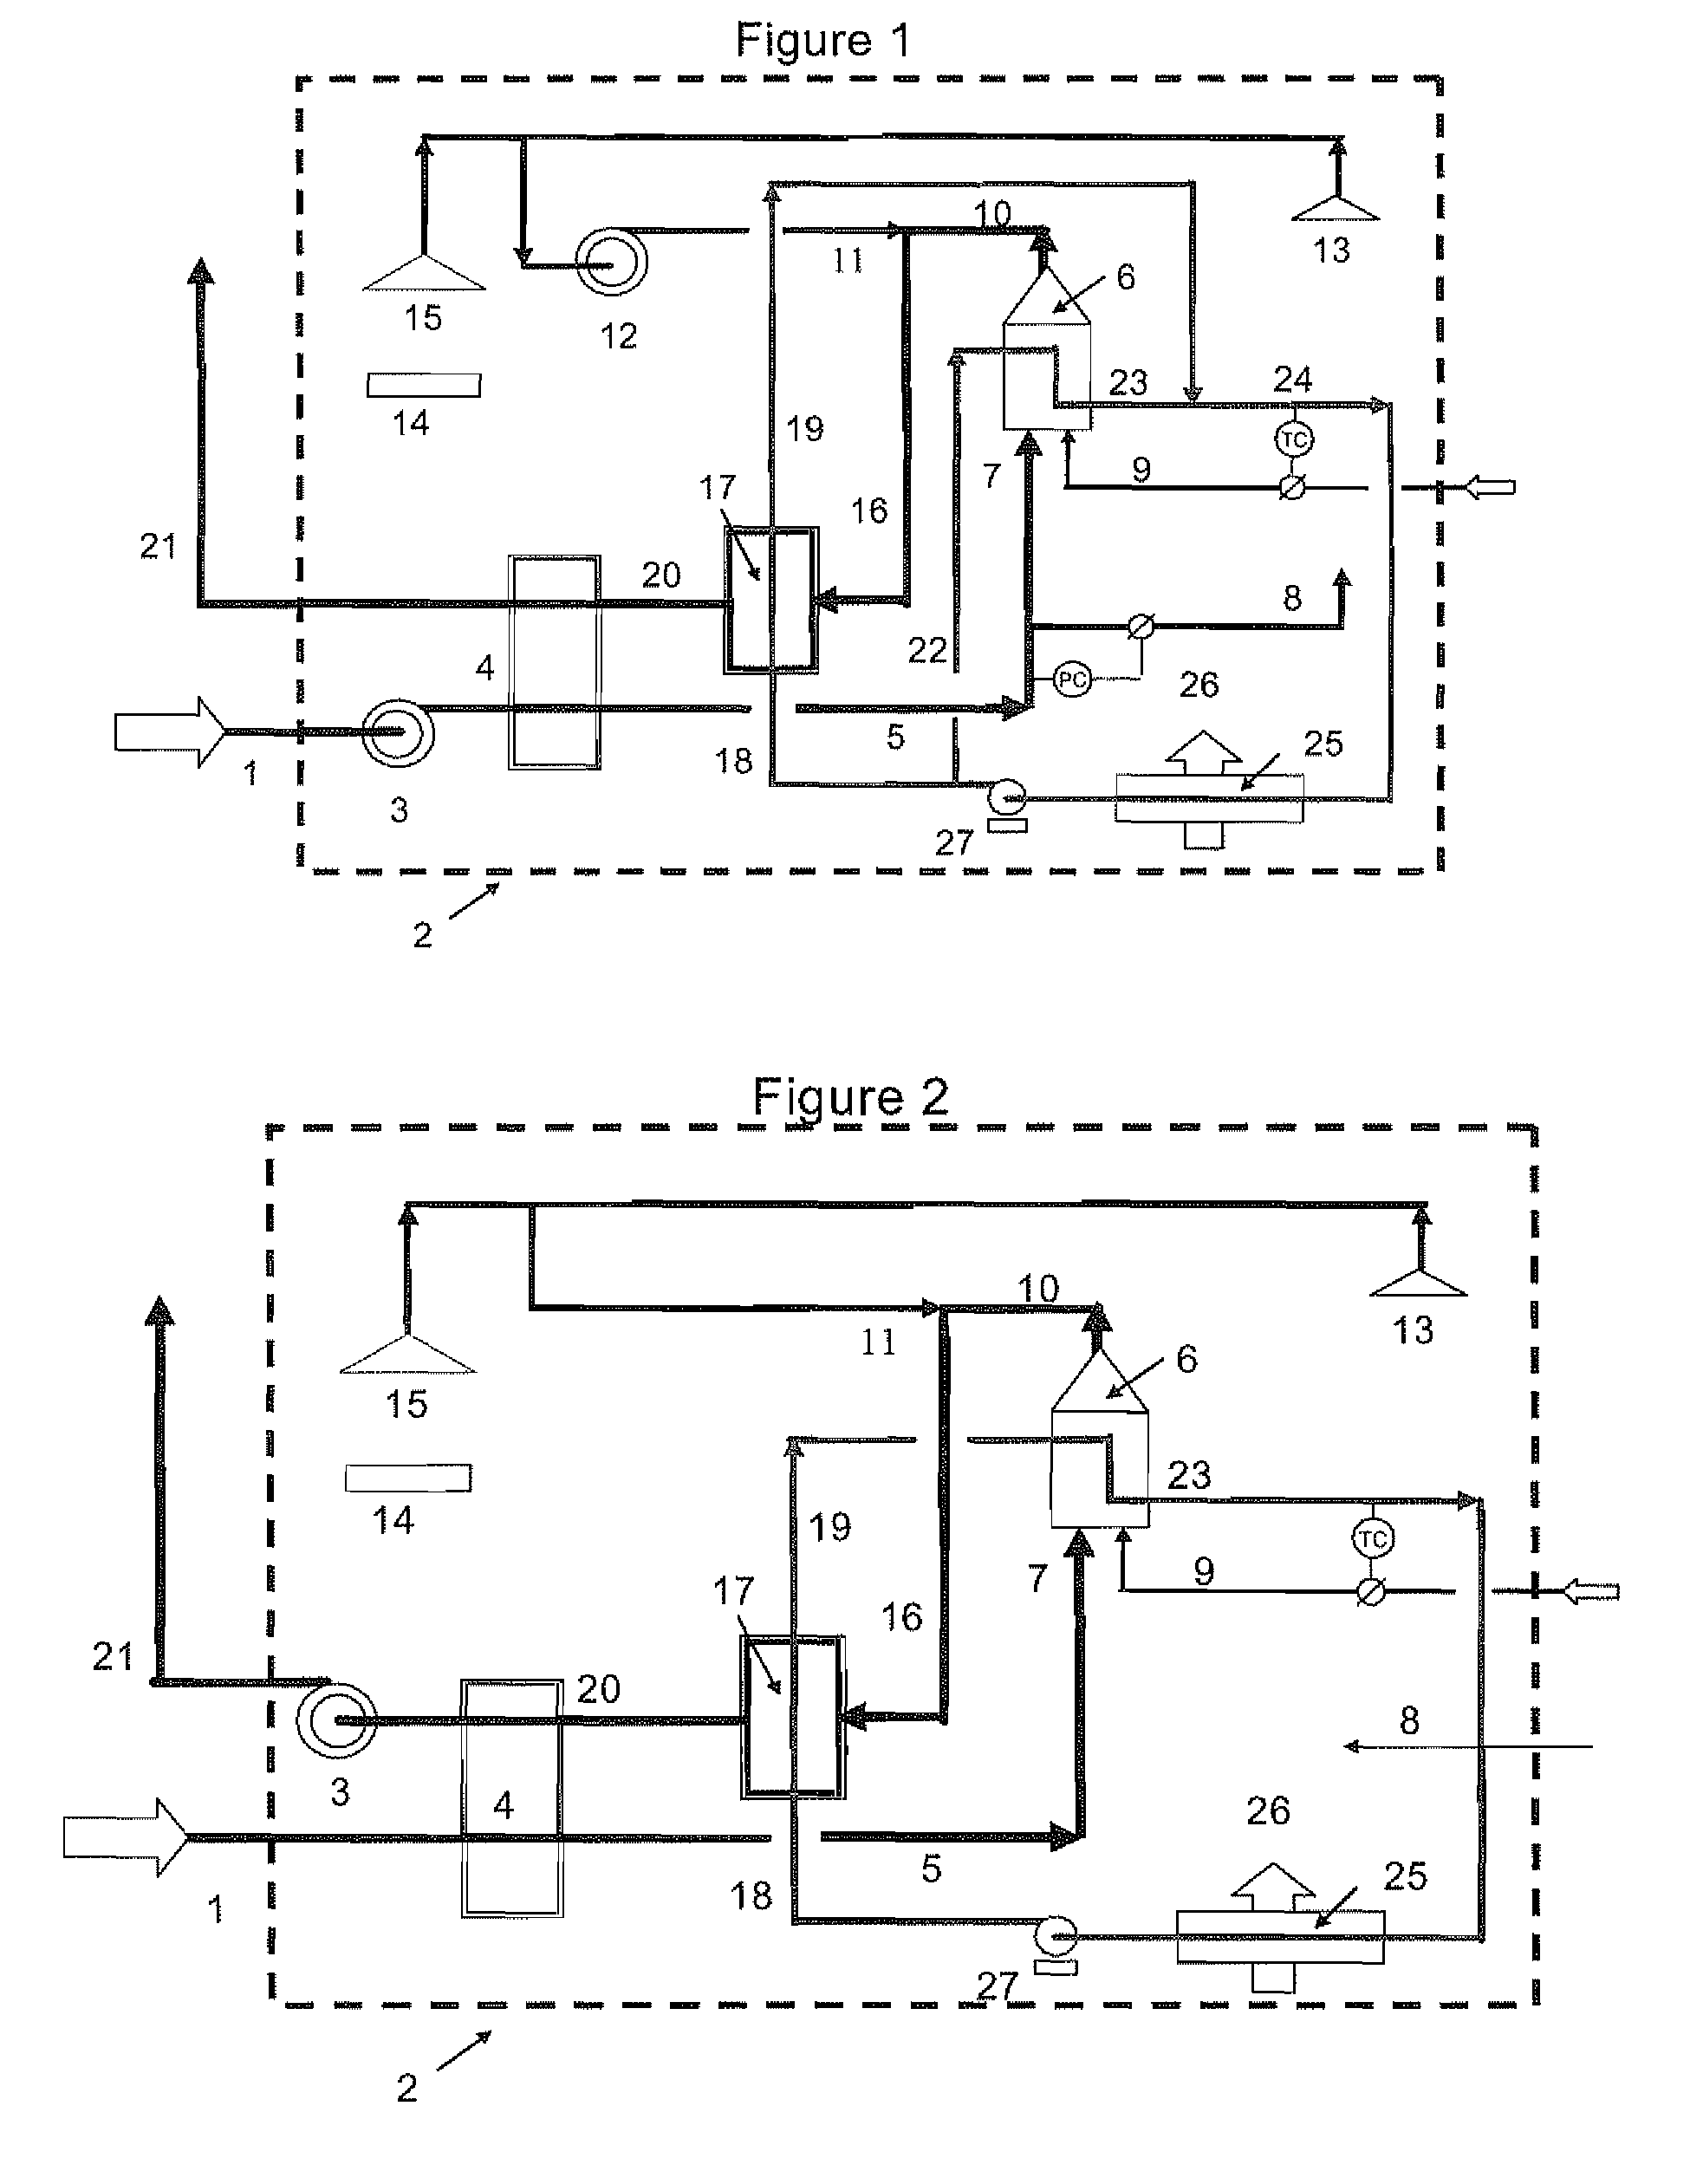 Apparatus and Method for Energy Recovery